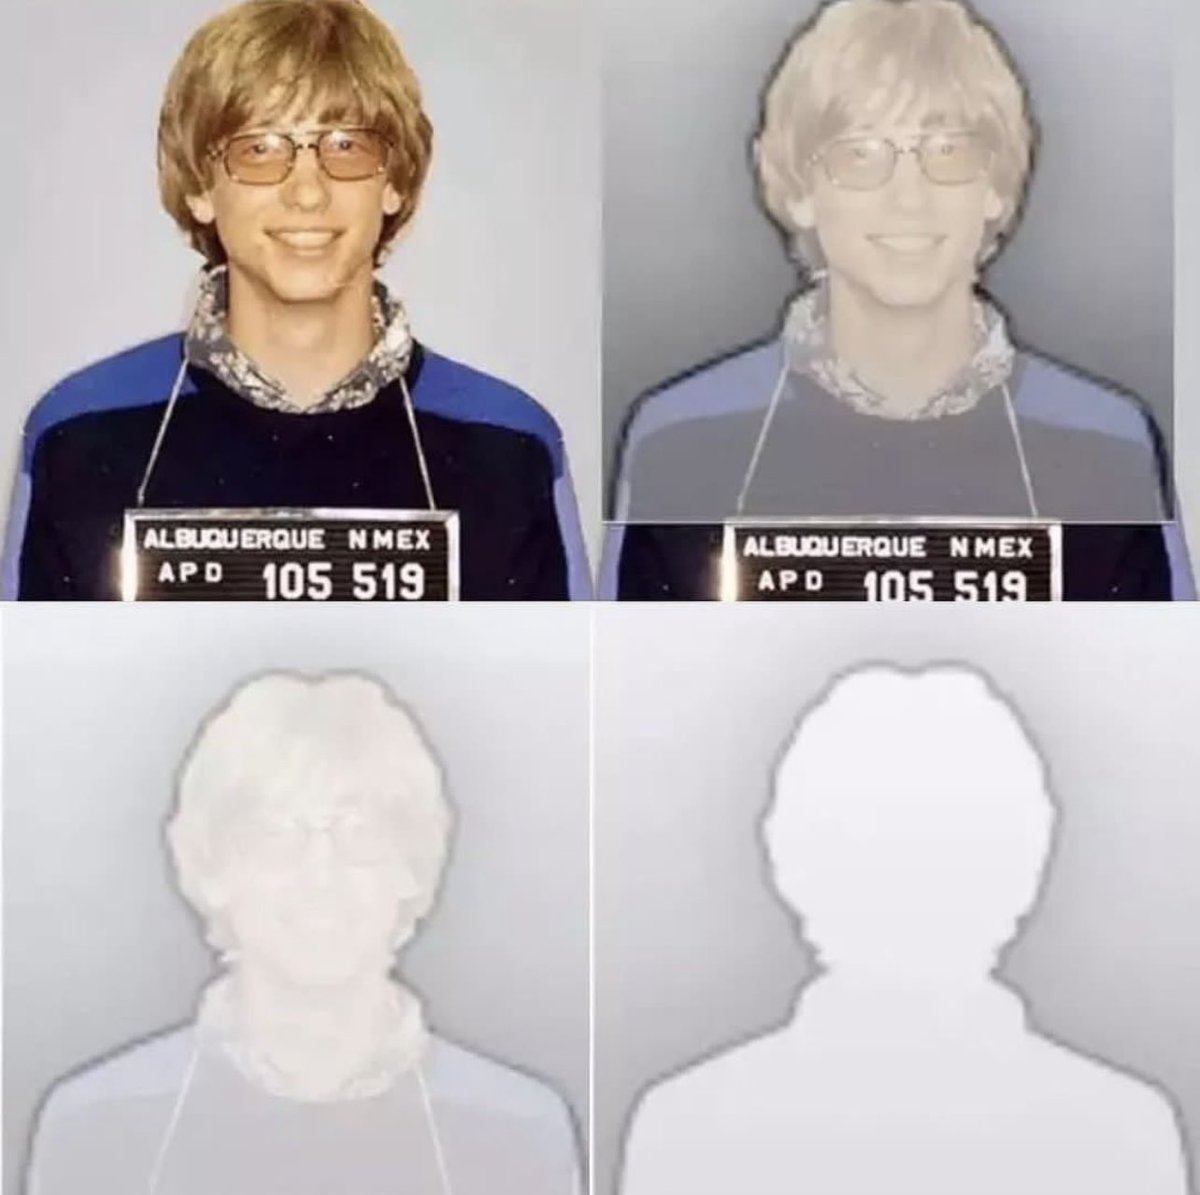 In 1977 Bill Gates was arrested for driving without a license. In 2010 he used the outline of his mugshot as the default profile picture for Microsoft Outlook.